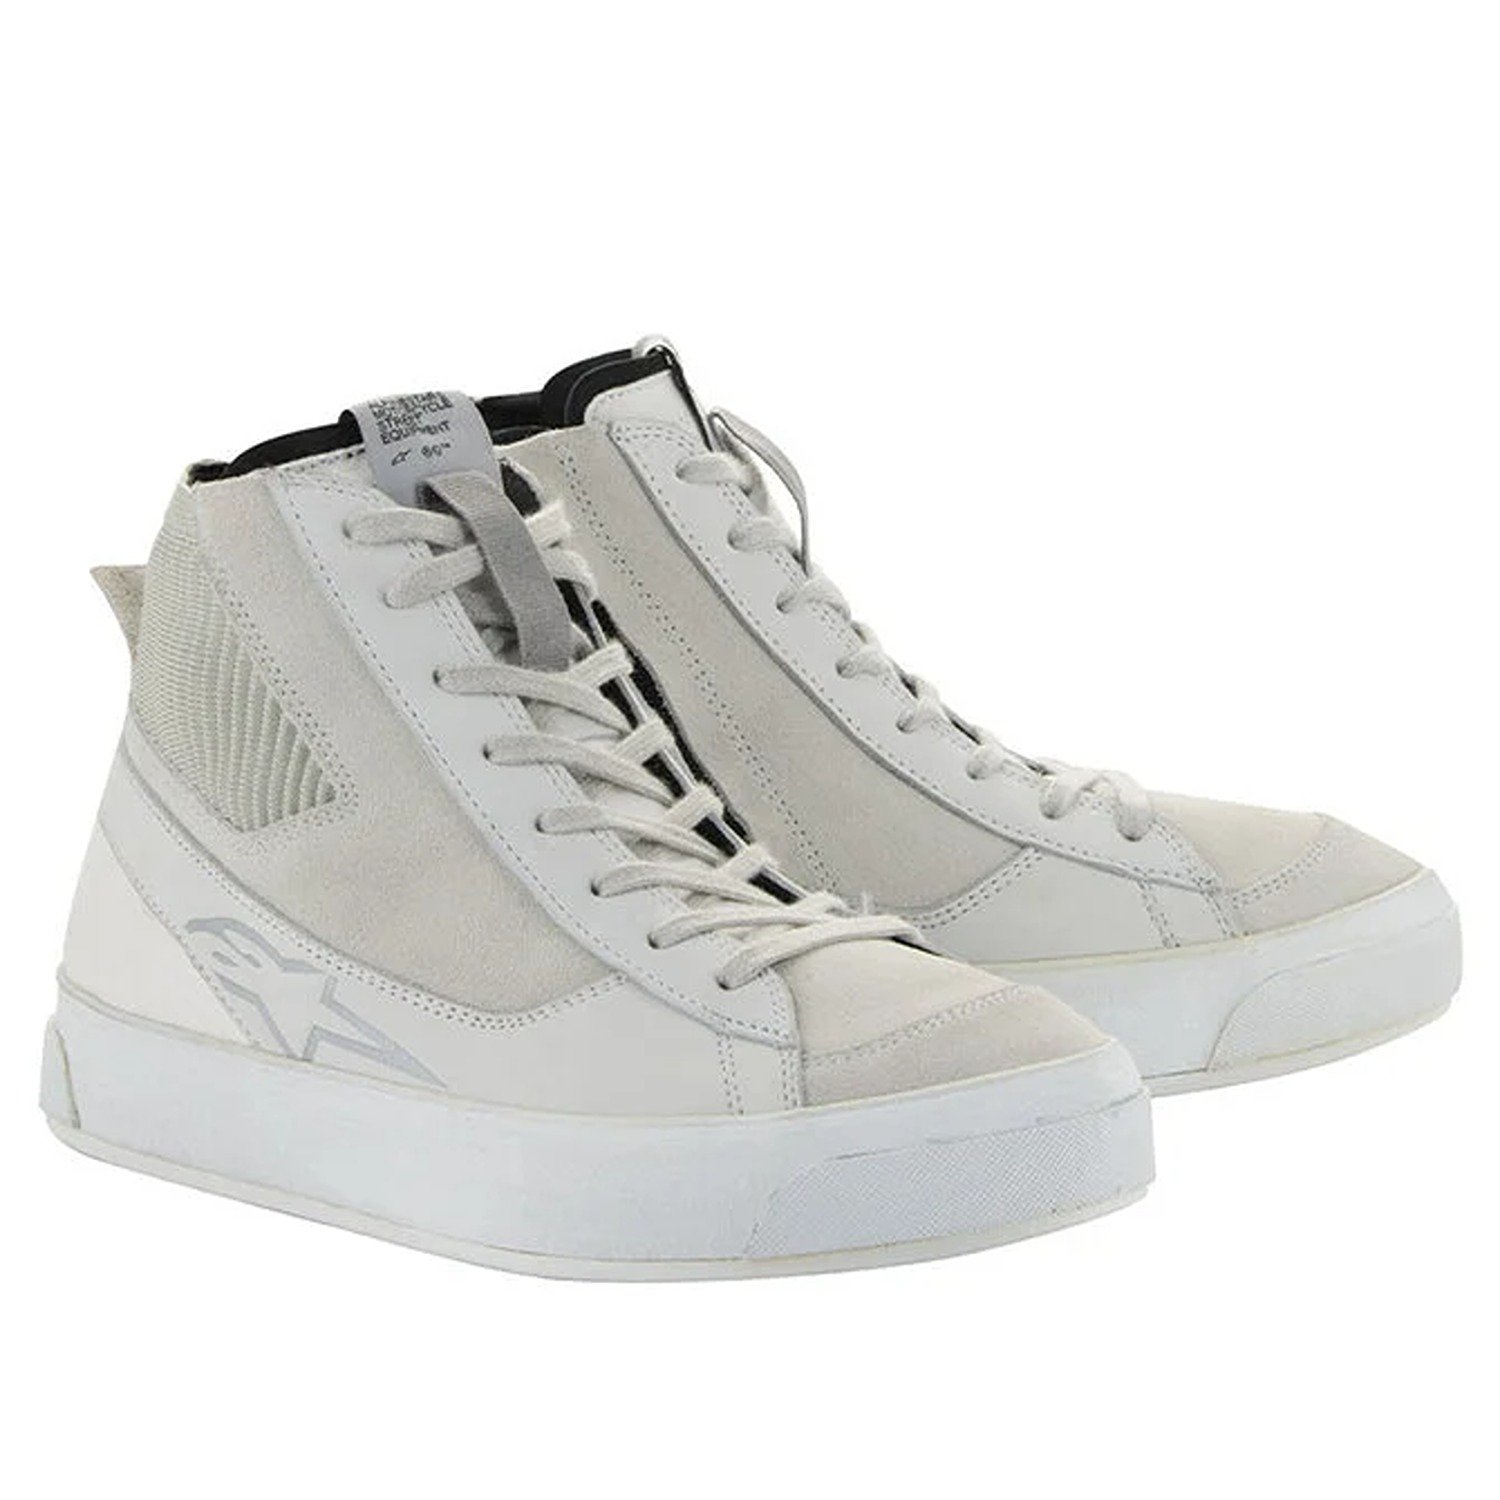 Image of Alpinestars Stella Stated Podium Shoes White Cool Gray Taille US 85